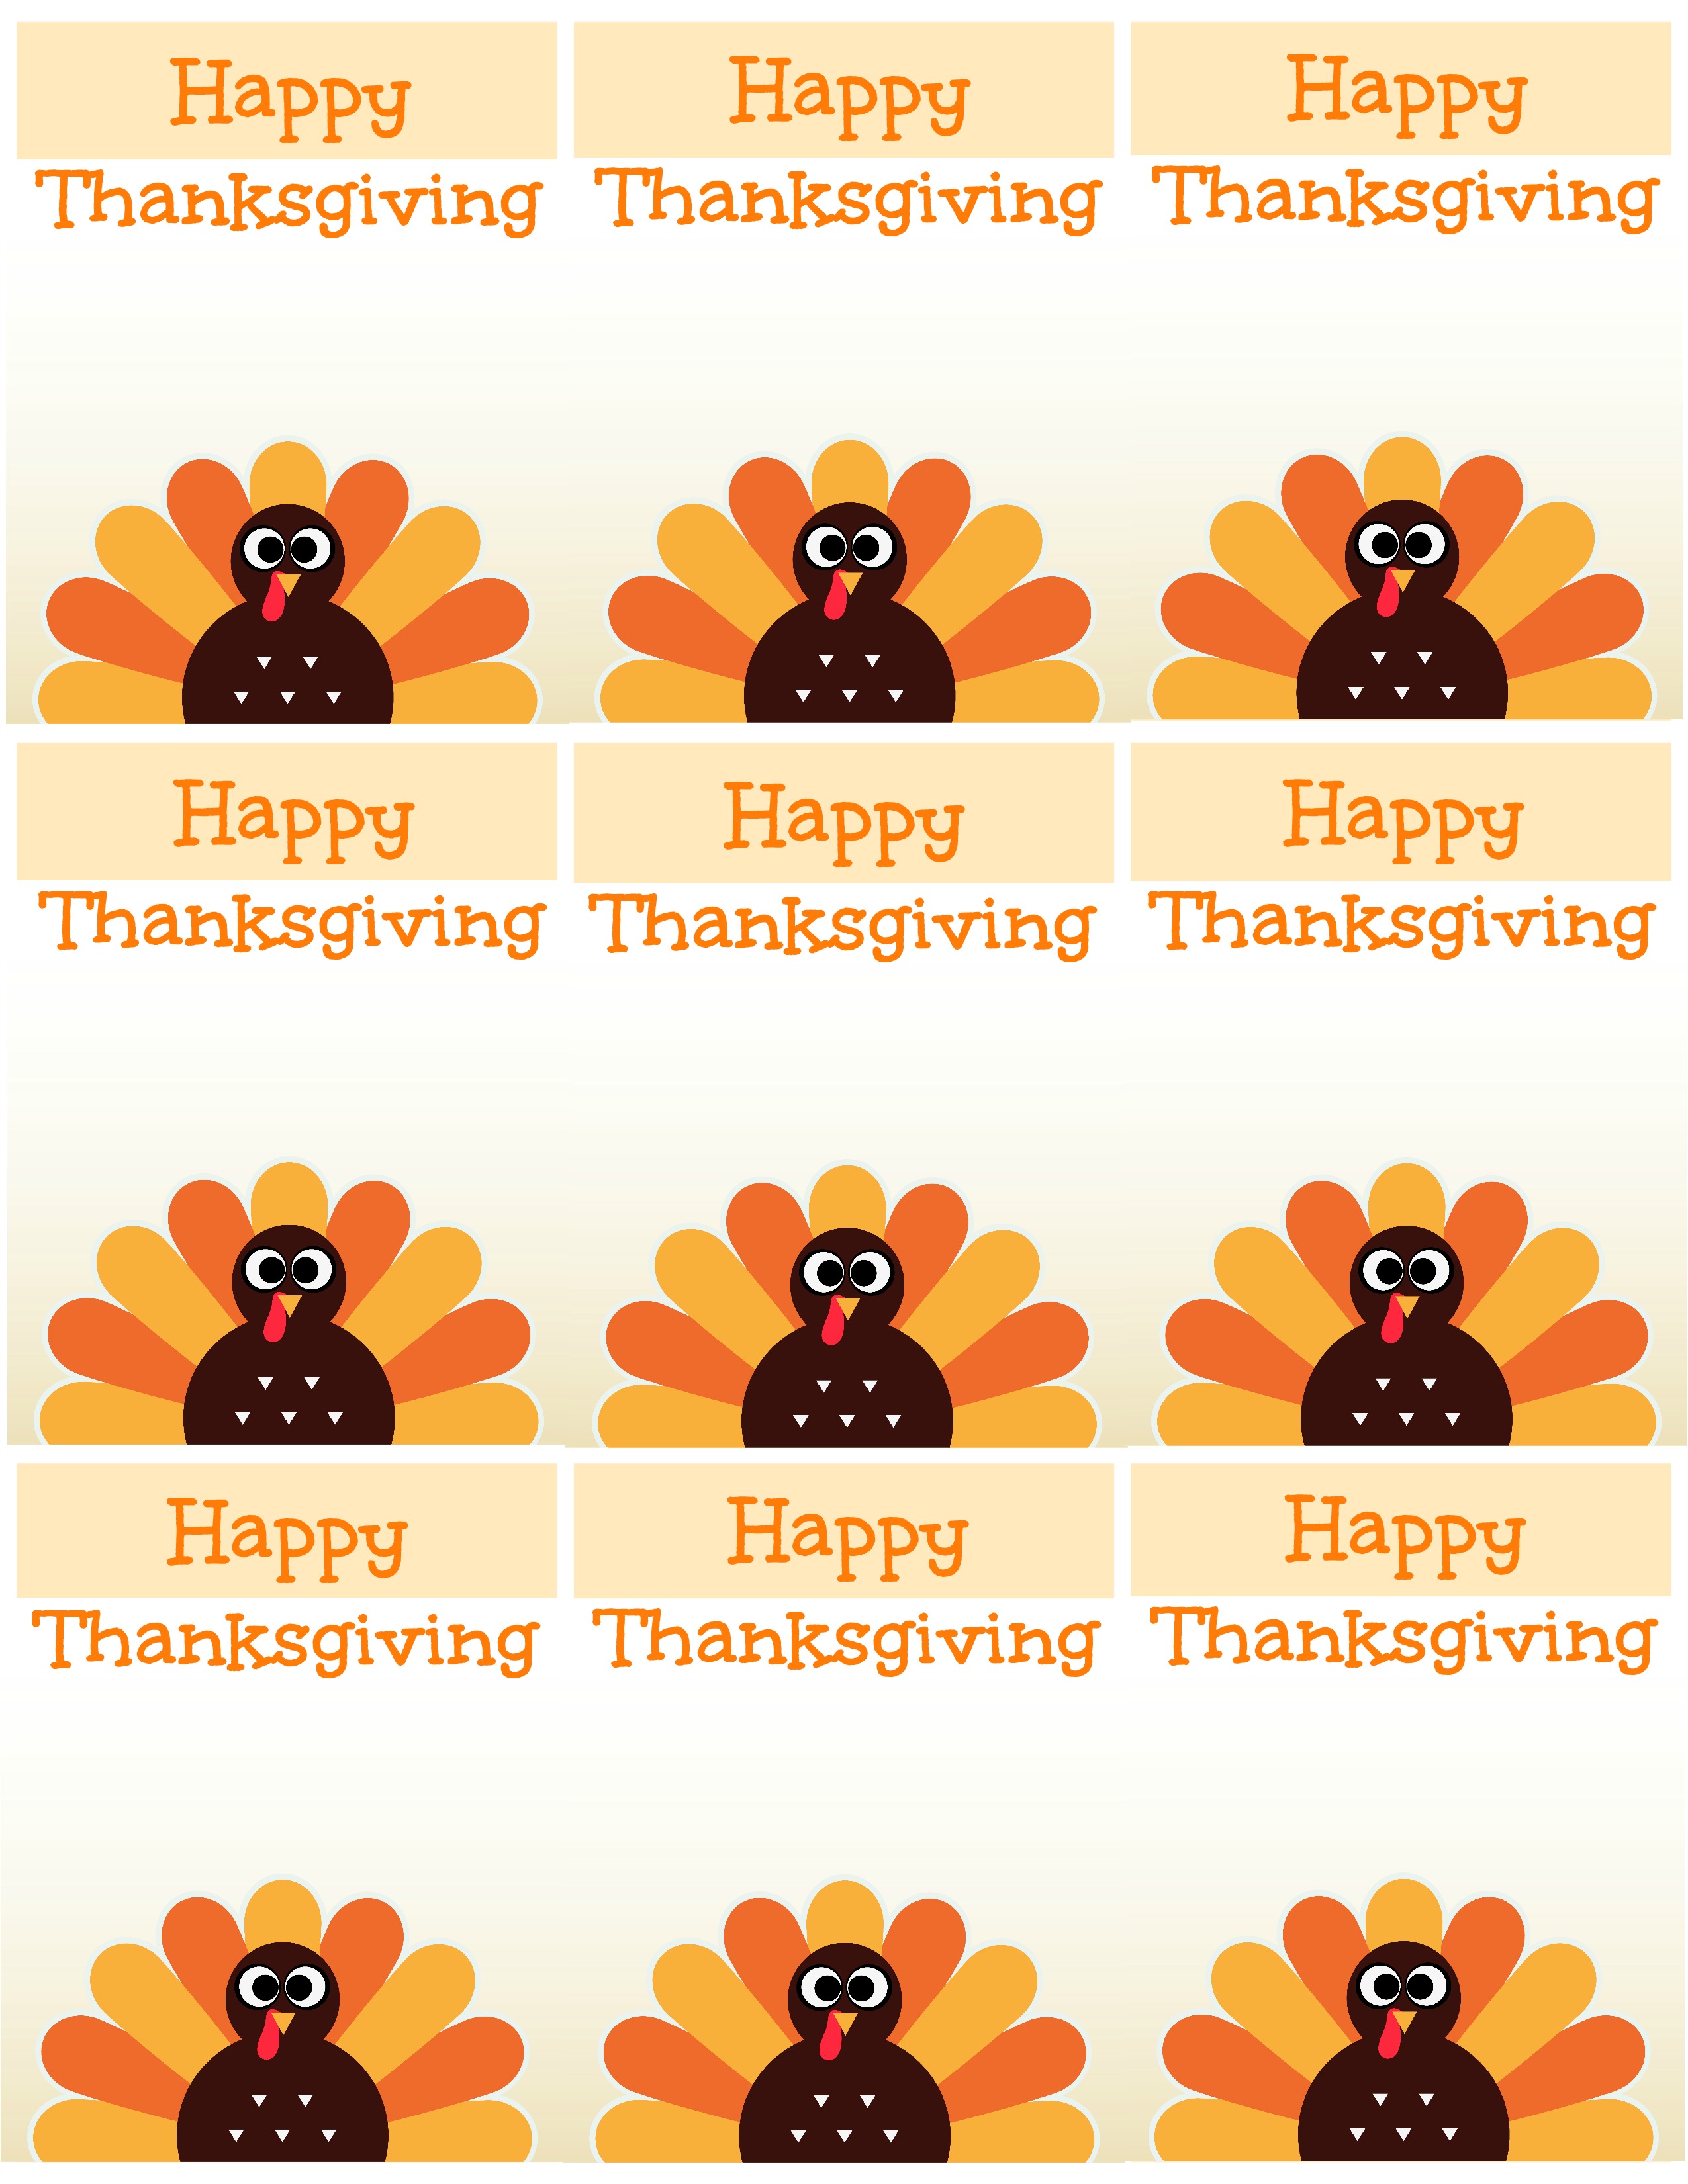 free-printable-thanksgiving-place-cards-momswhosave